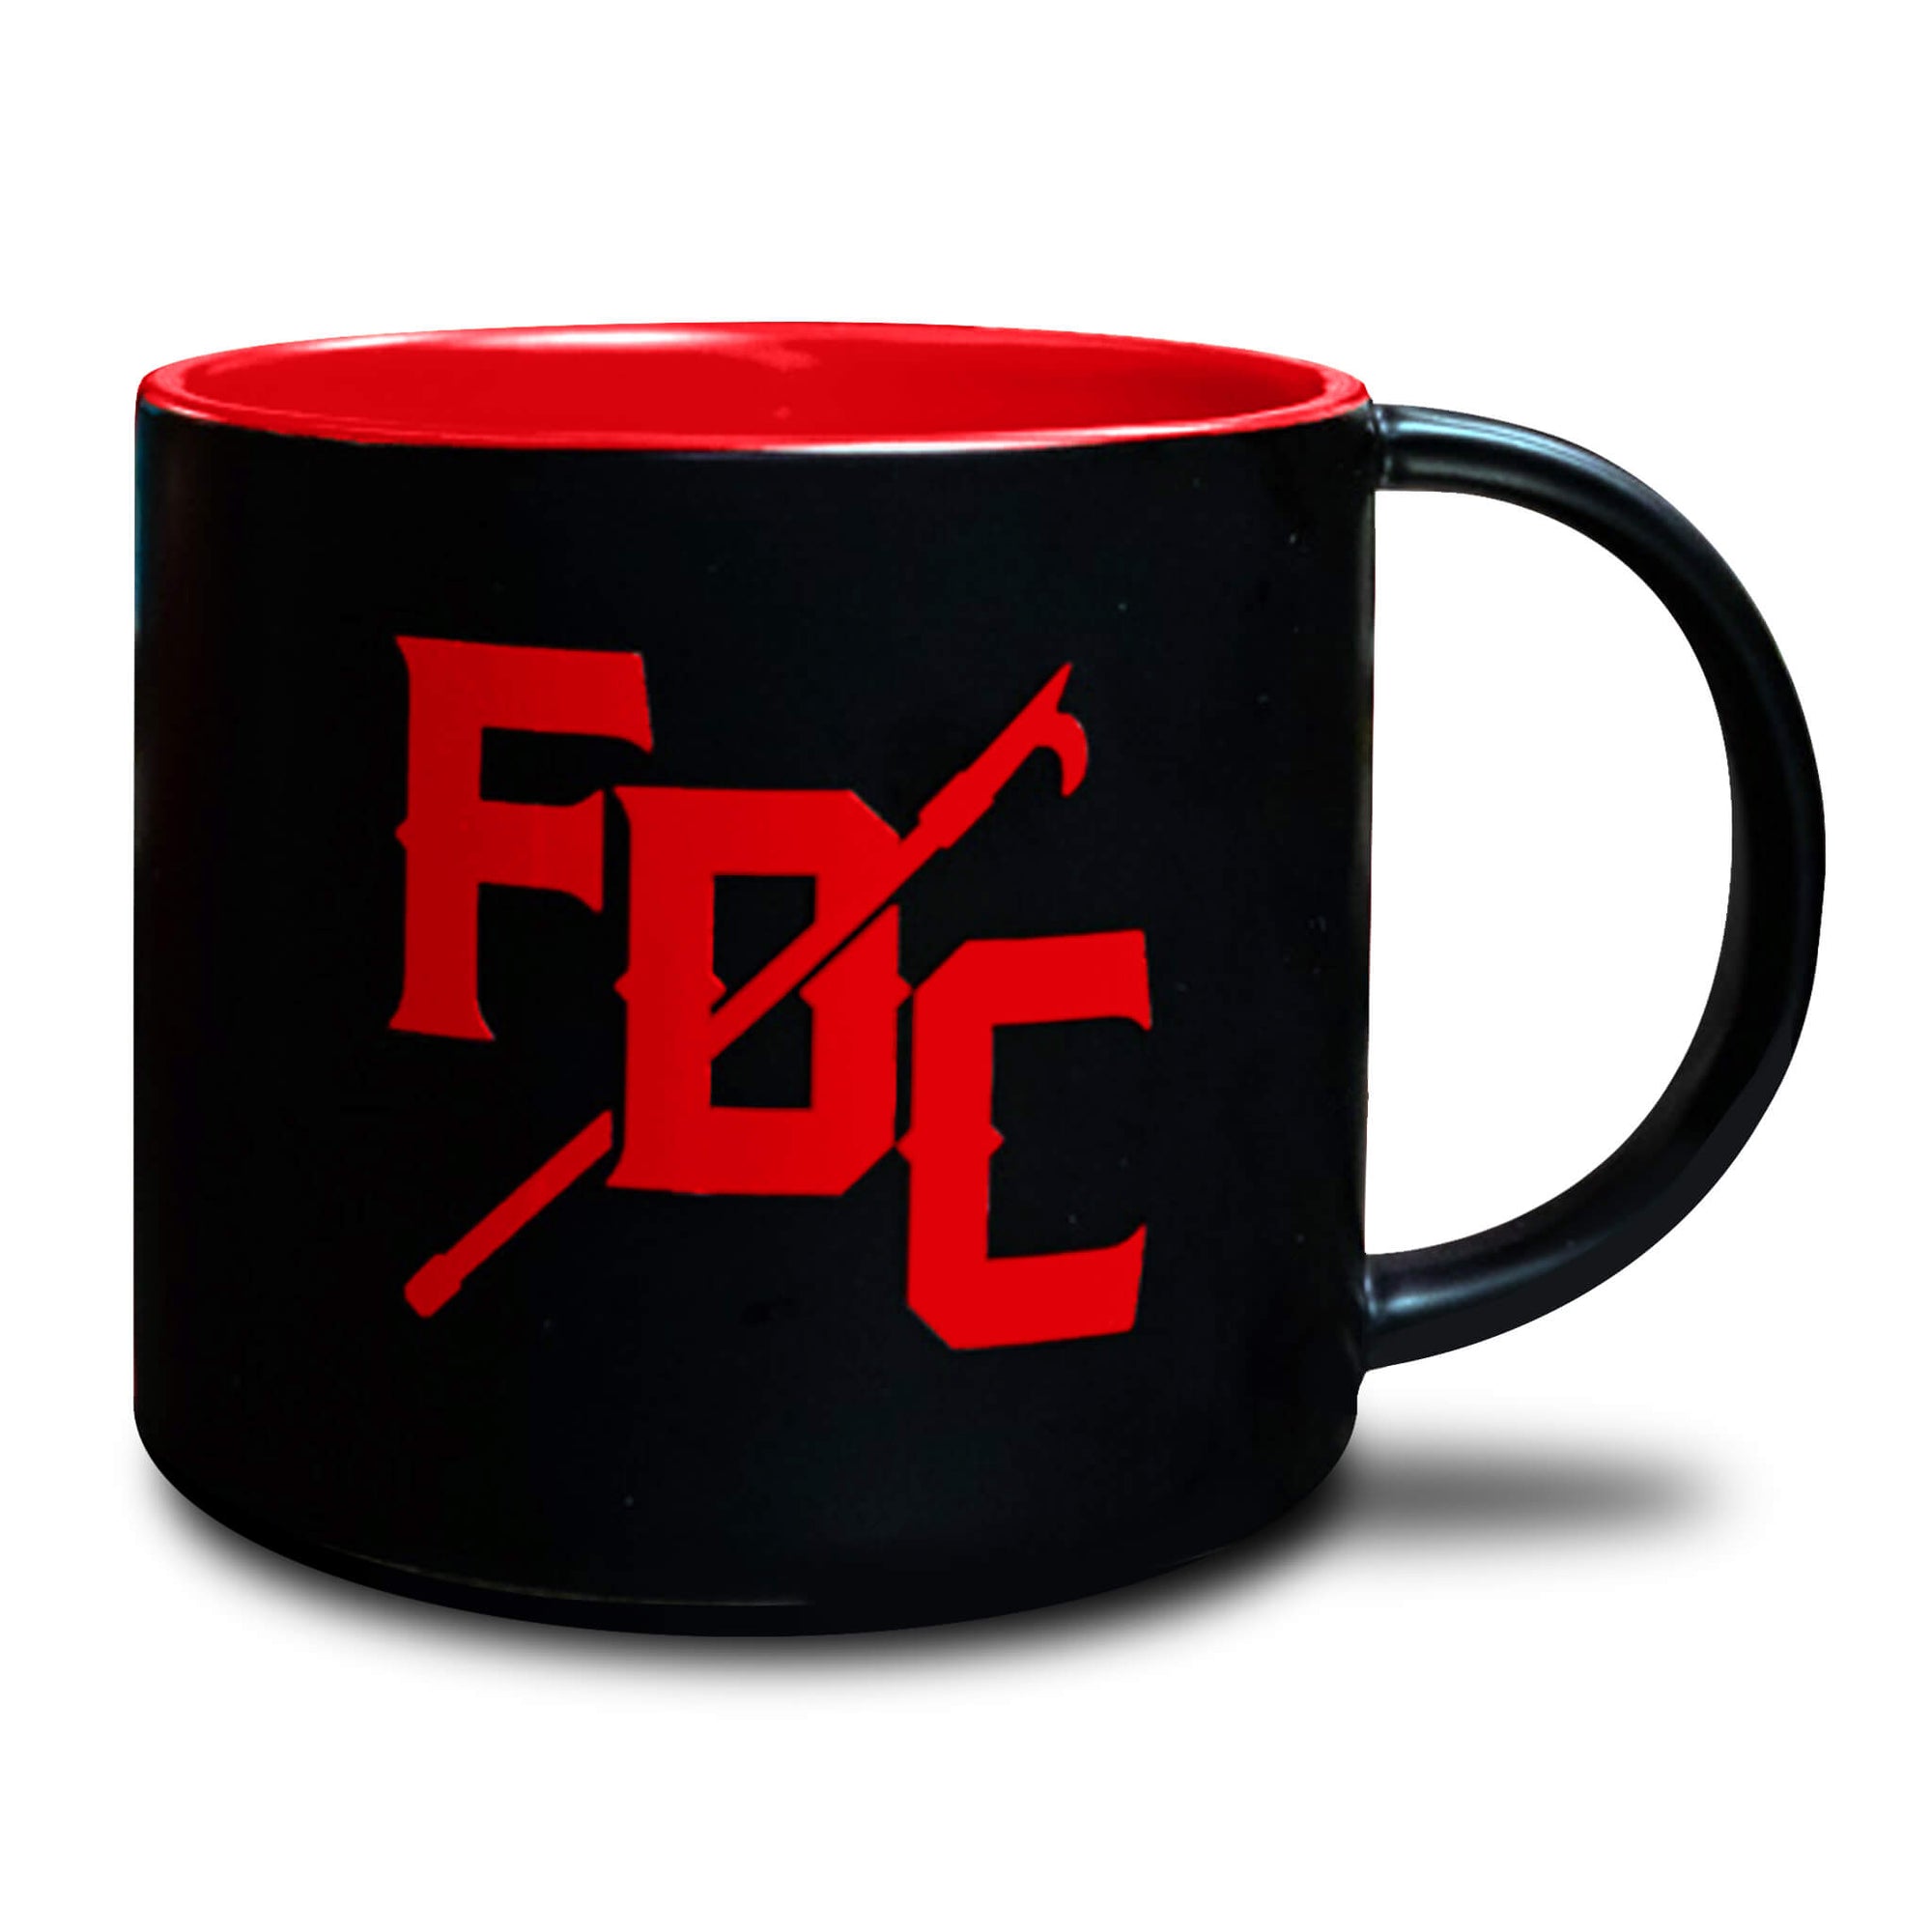 Black mug with red FDC pike pole logo on the front and red inside of the mug.